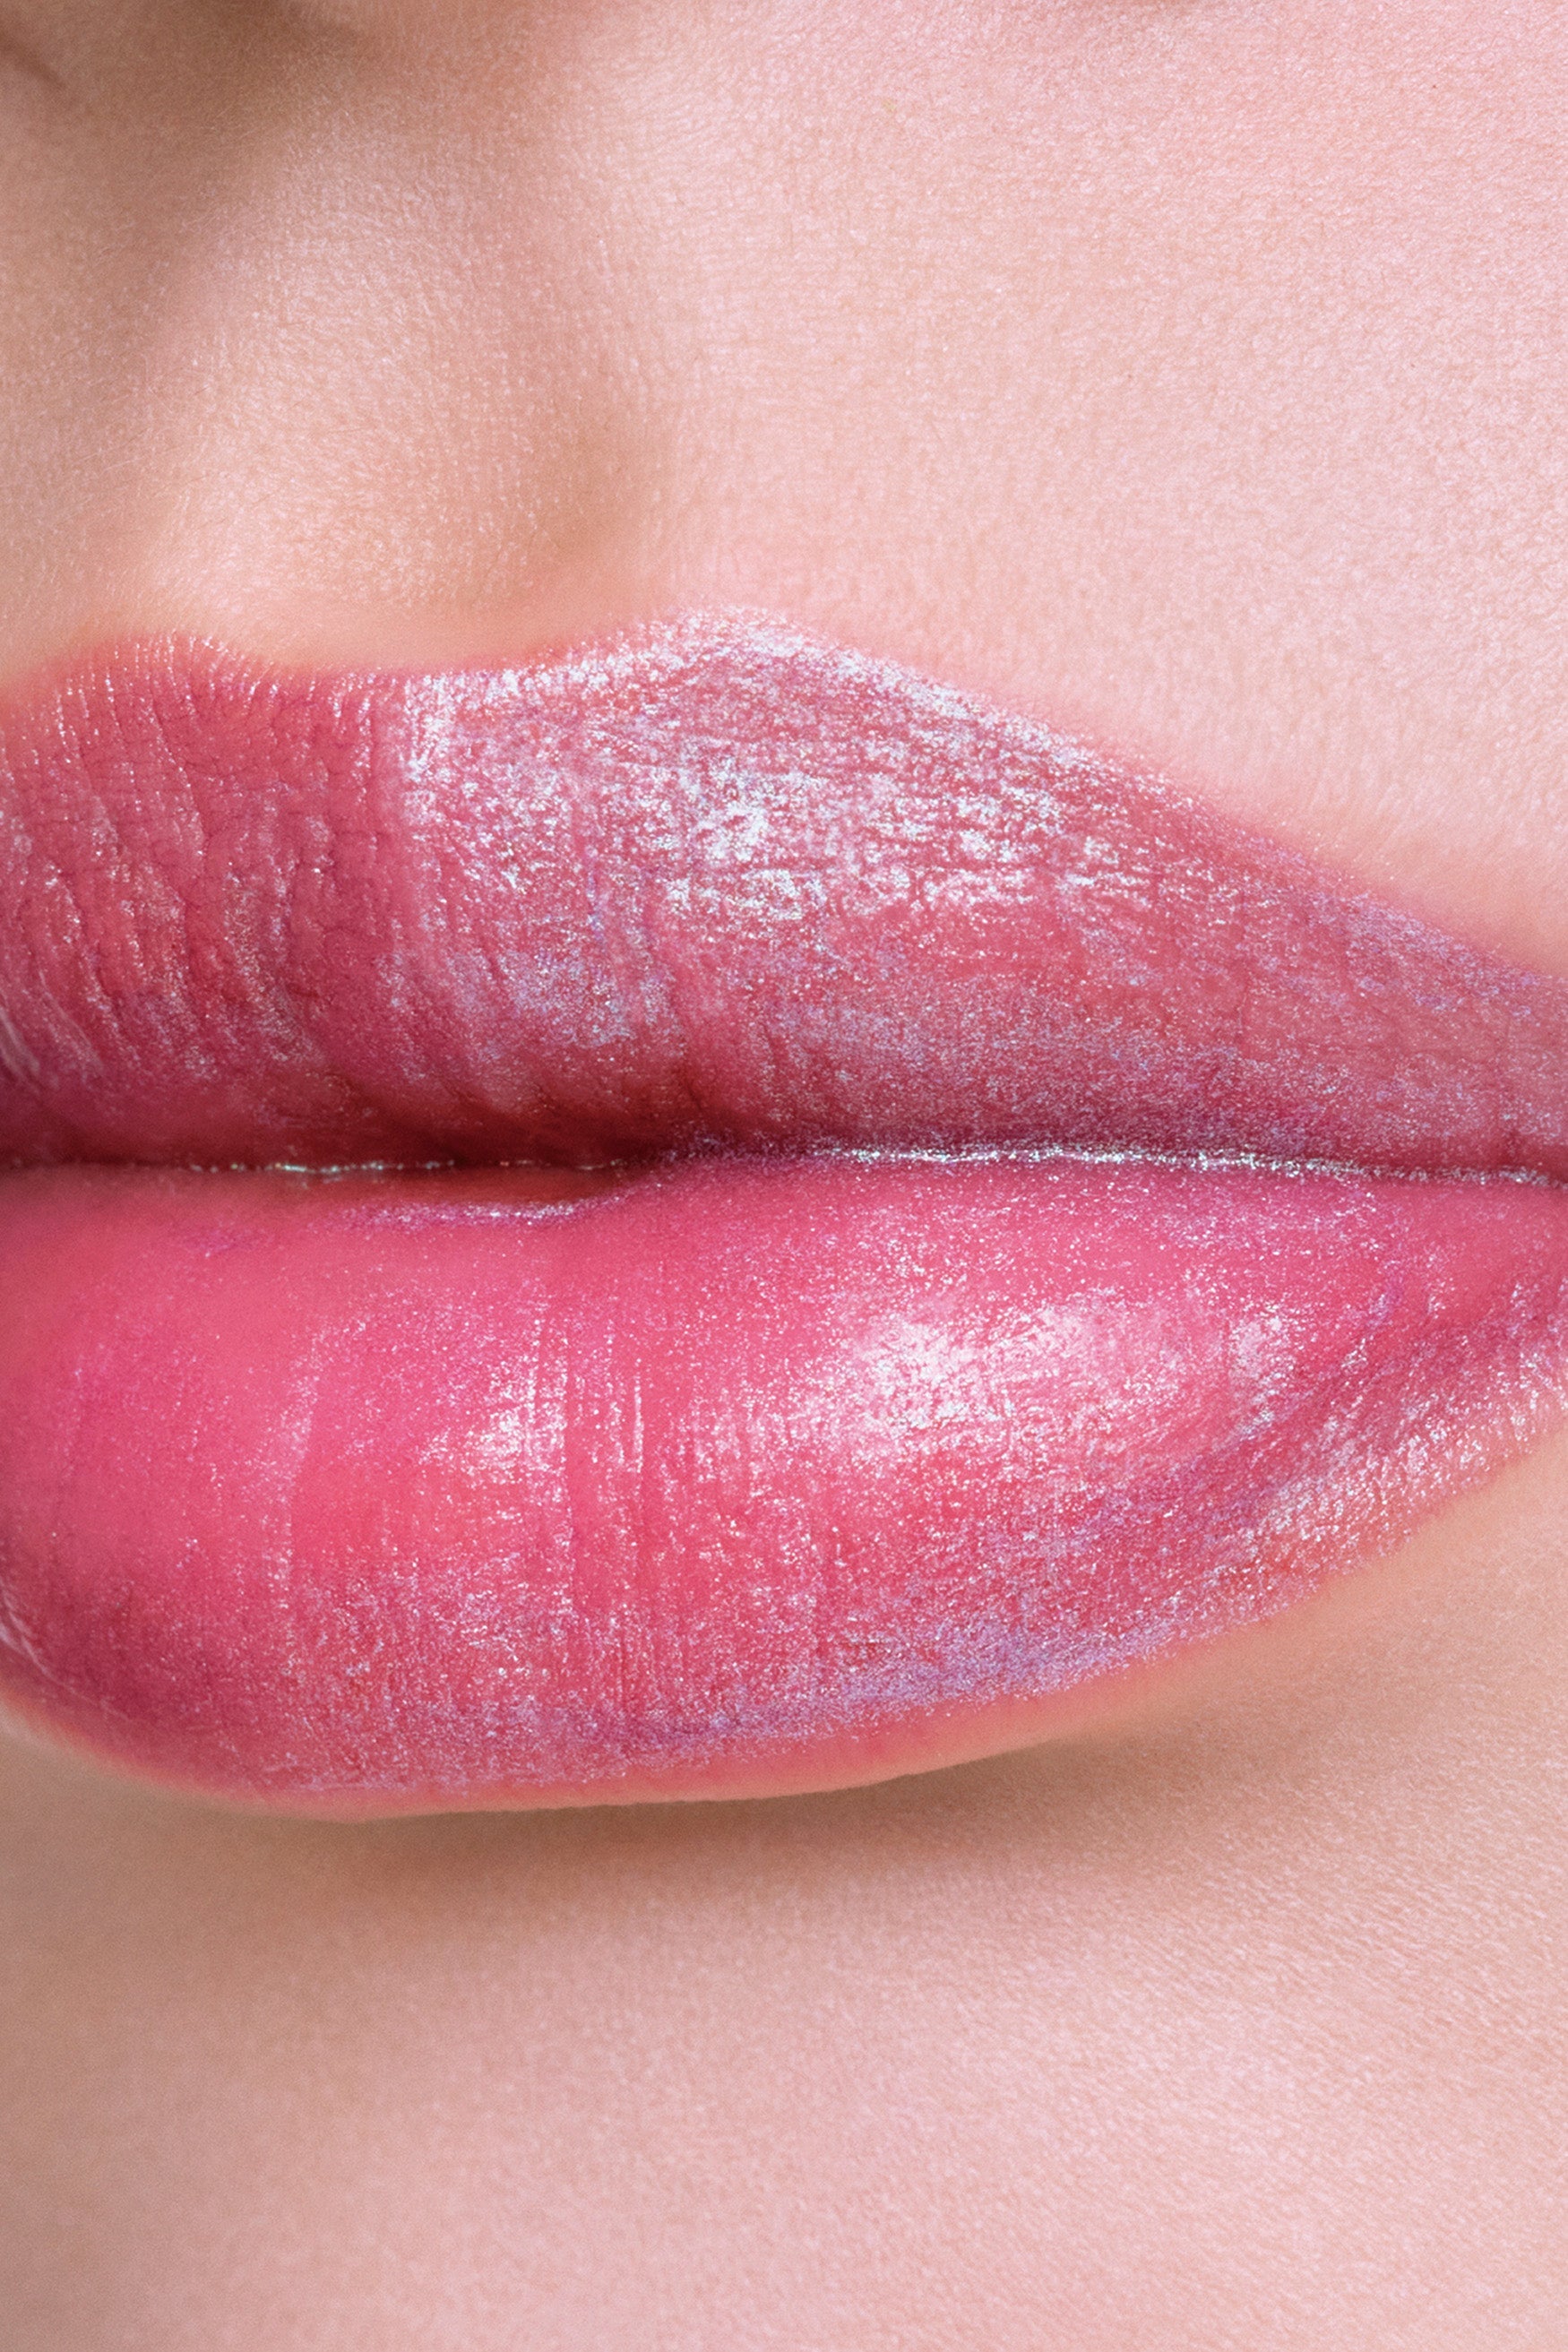 This lip with Rosa canina fruit extract - moisturizer gives your lips a natural and dewy tone